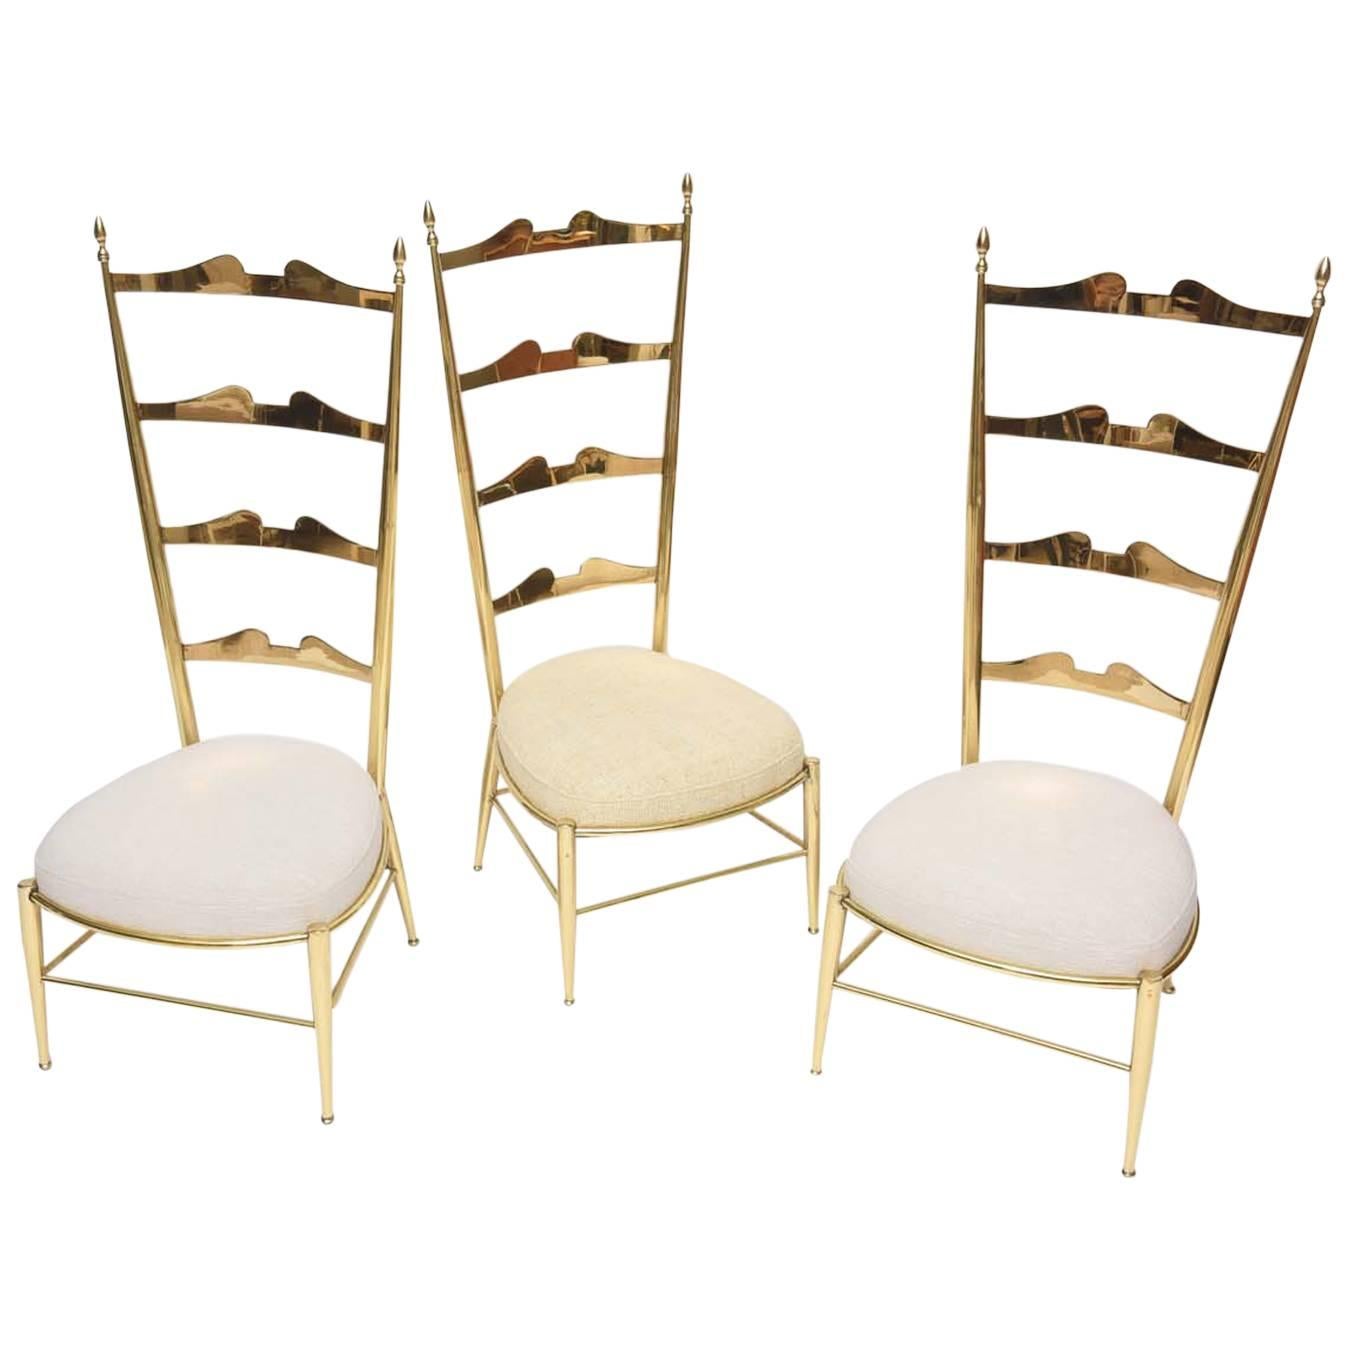 Rare Tall Back Brass Chiavari Chairs with Truncated Legs